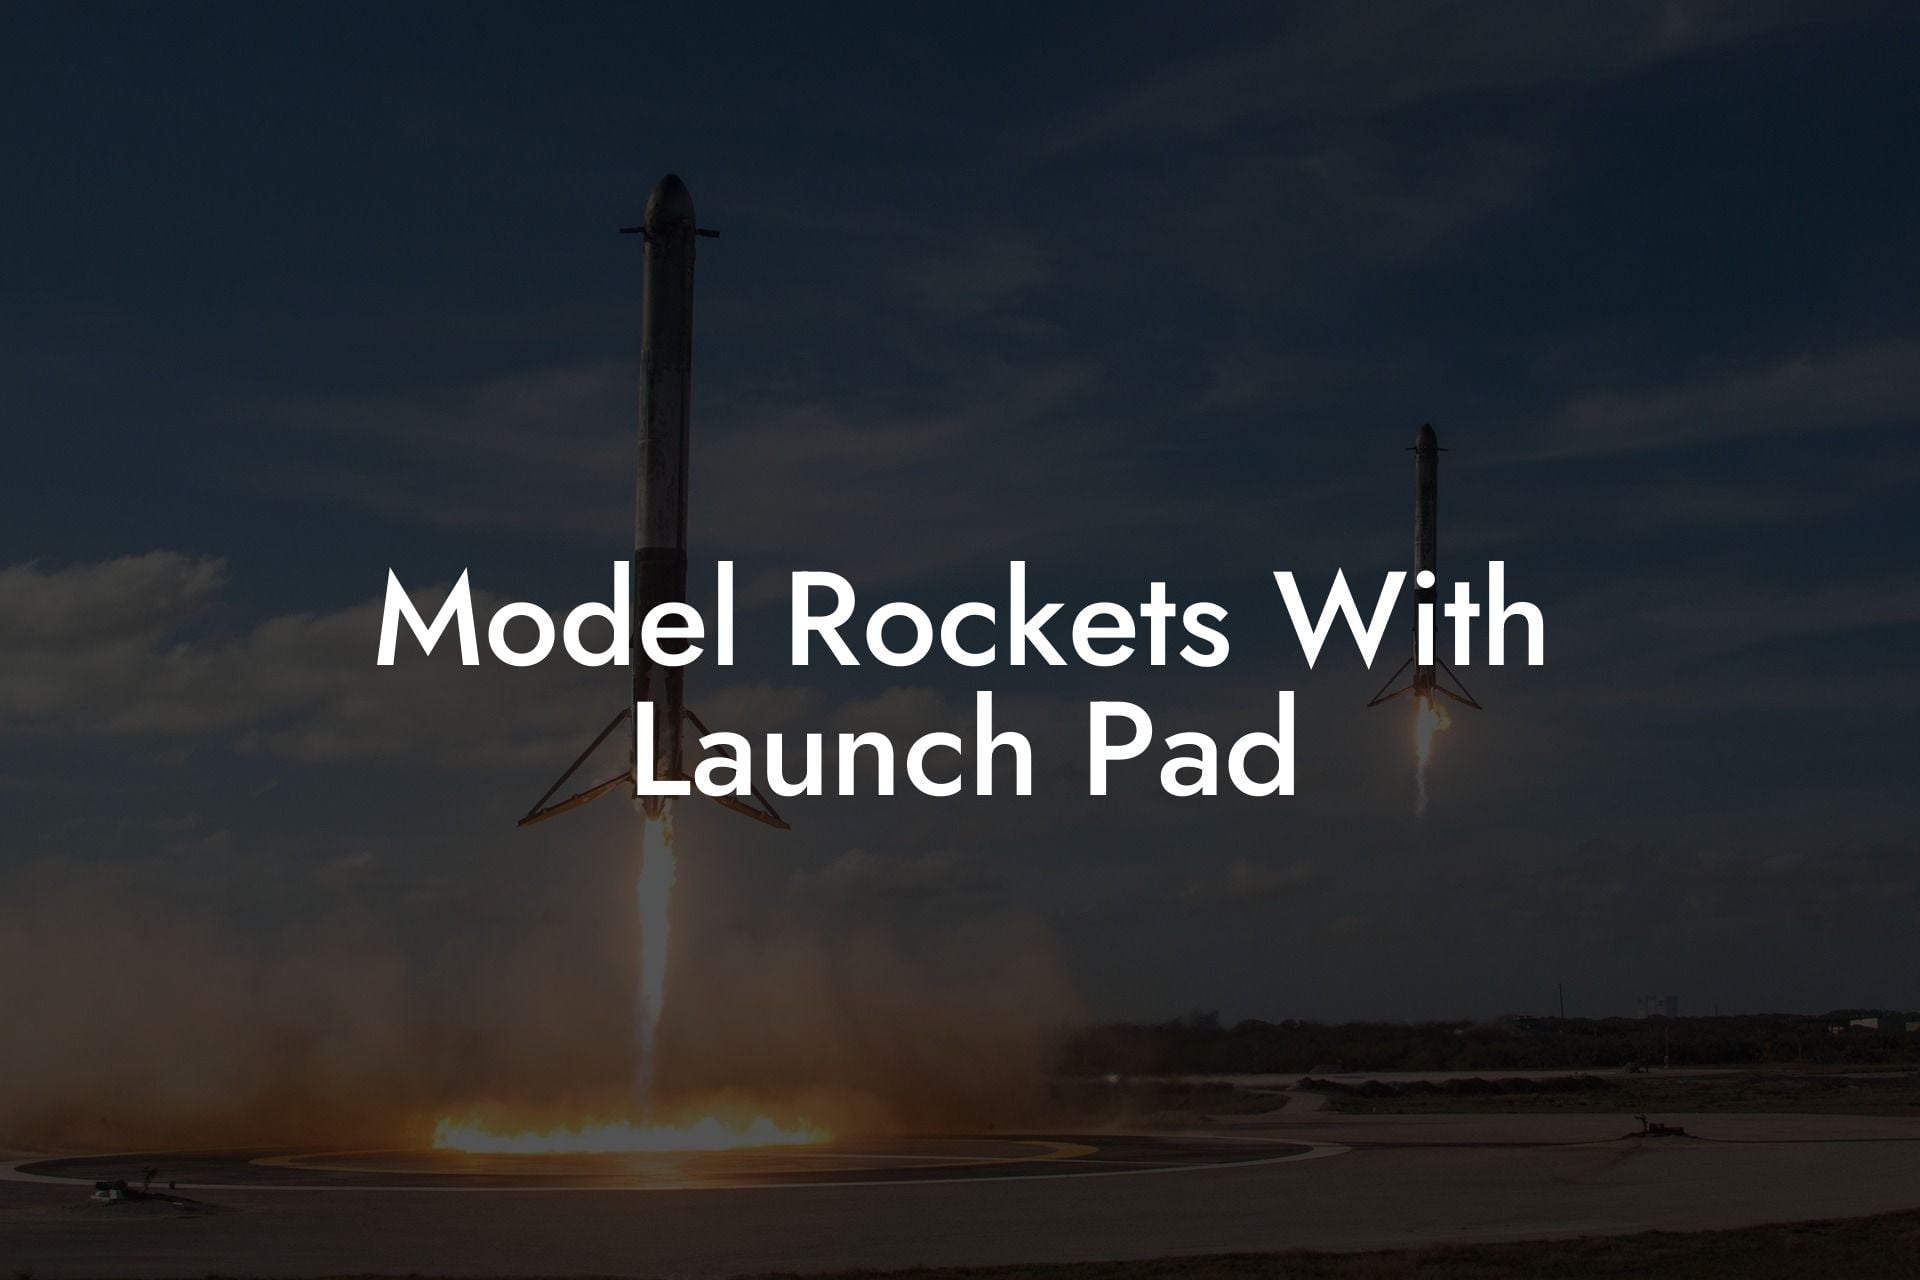 Model Rockets With Launch Pad